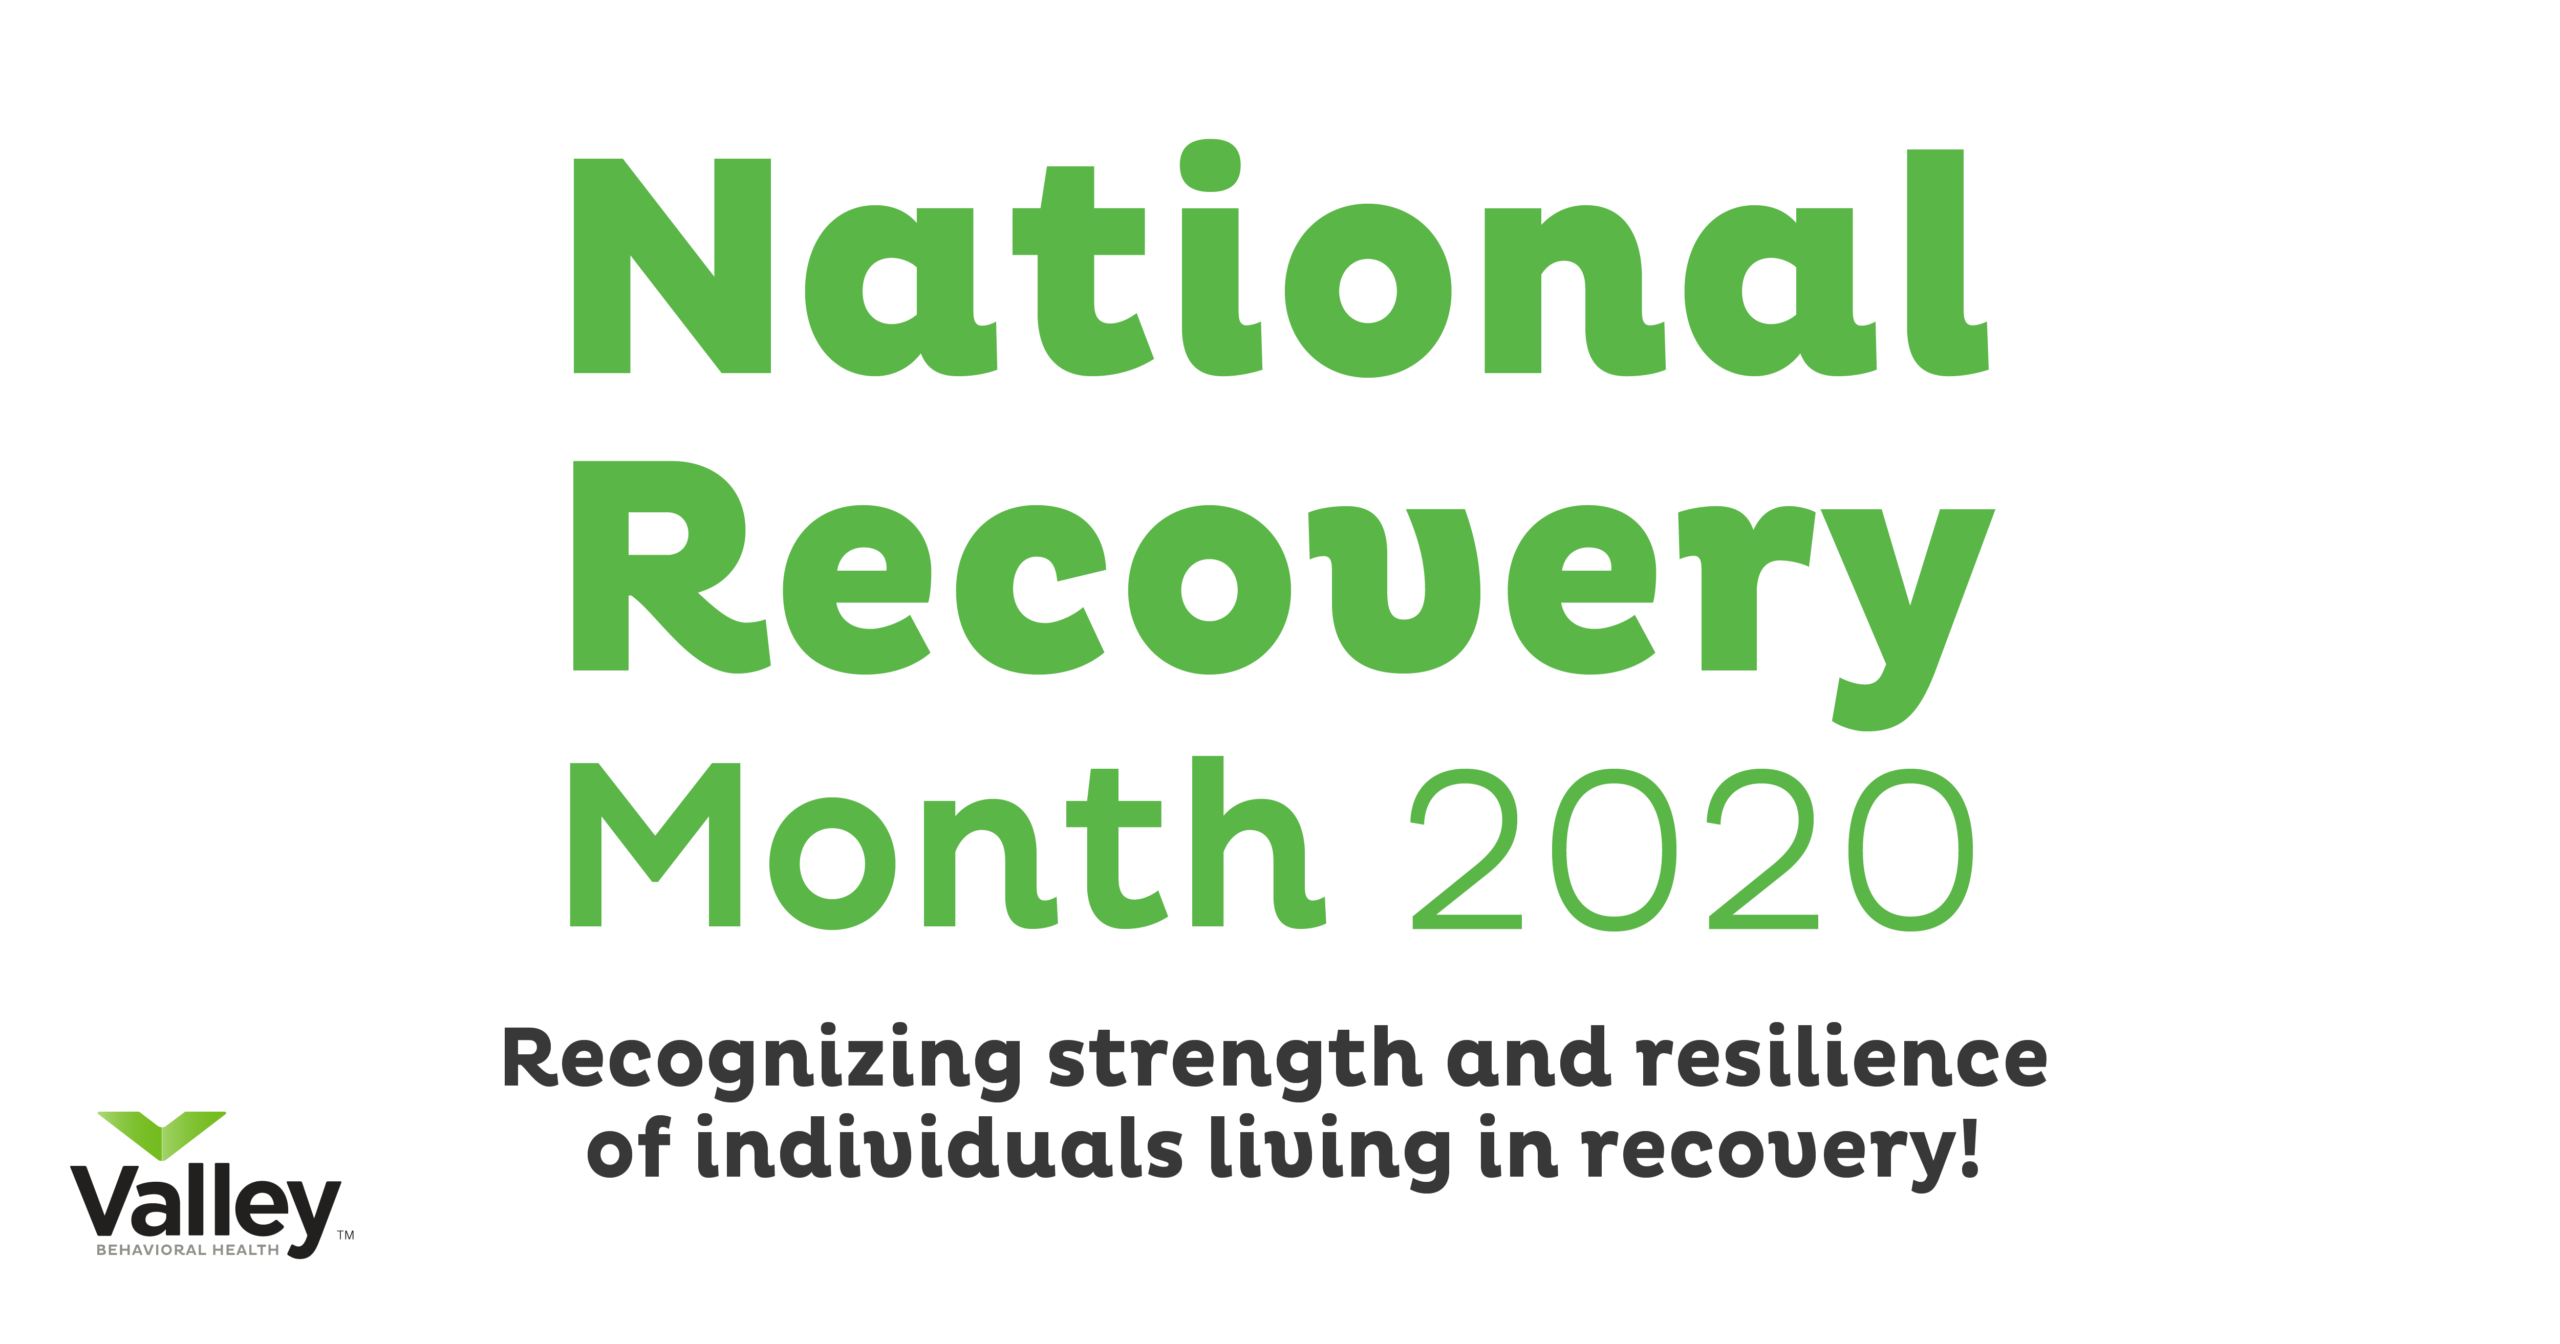 Recovery Month